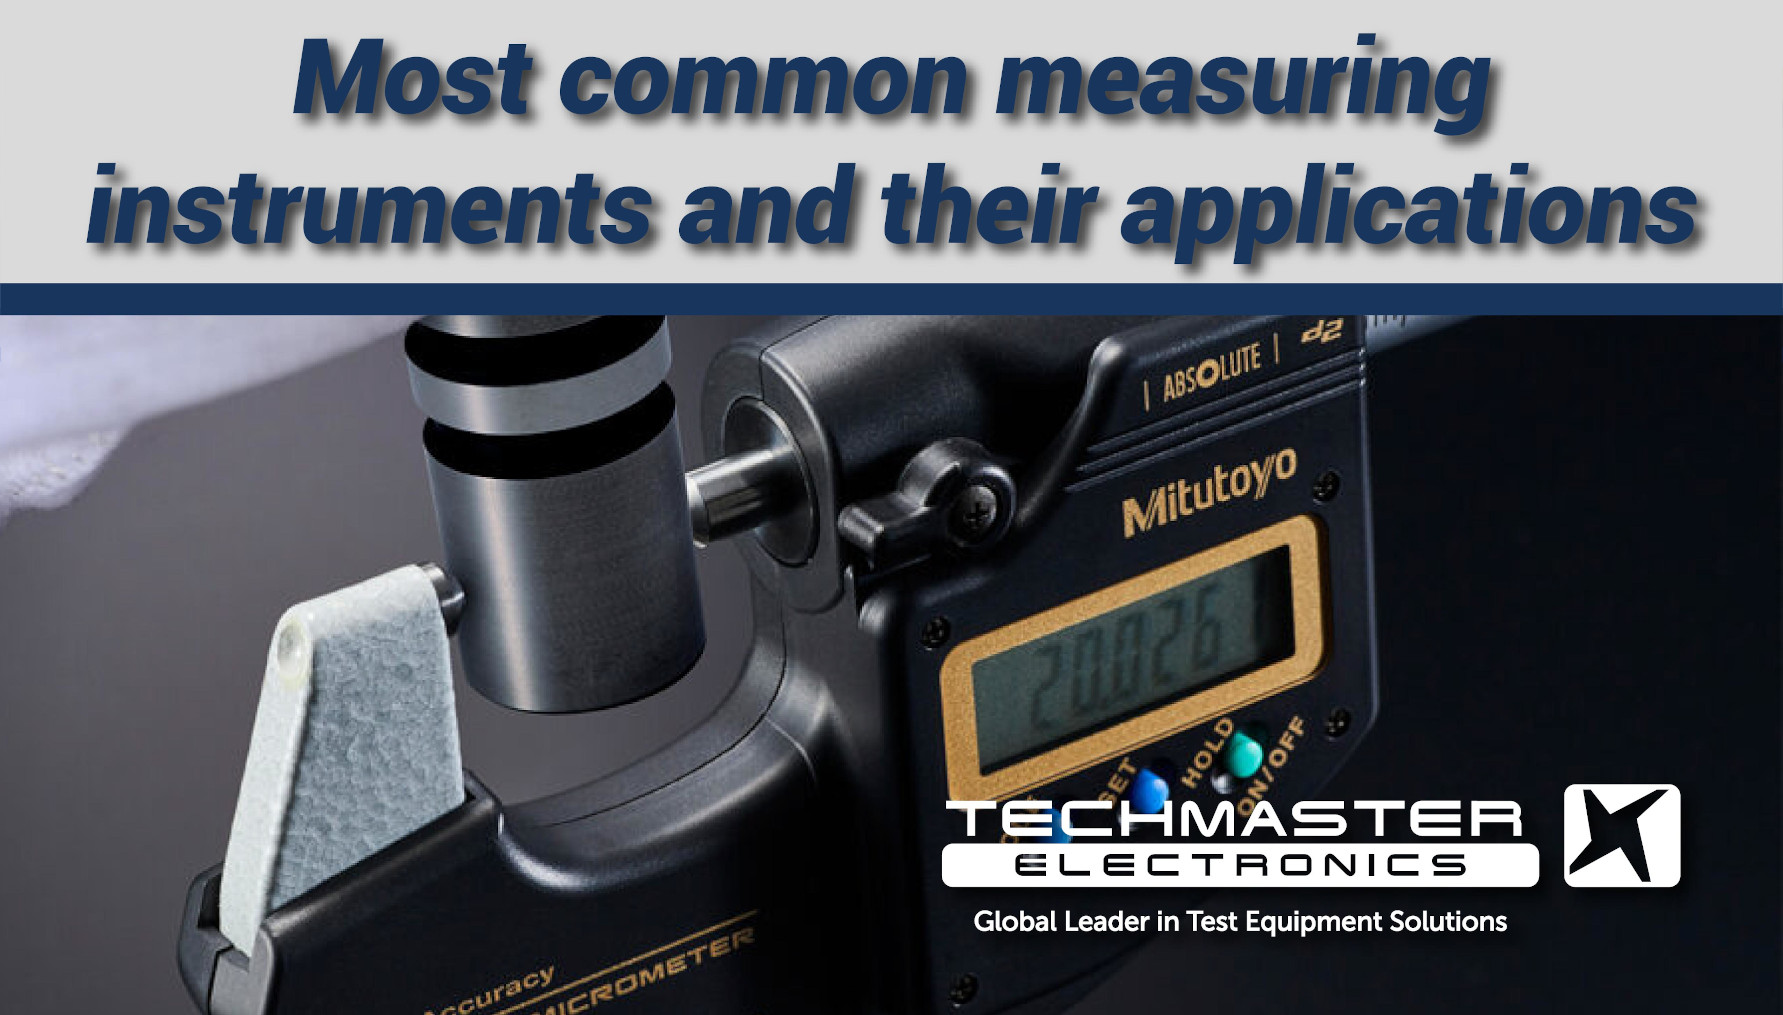 Most common measuring instruments used in metrology.